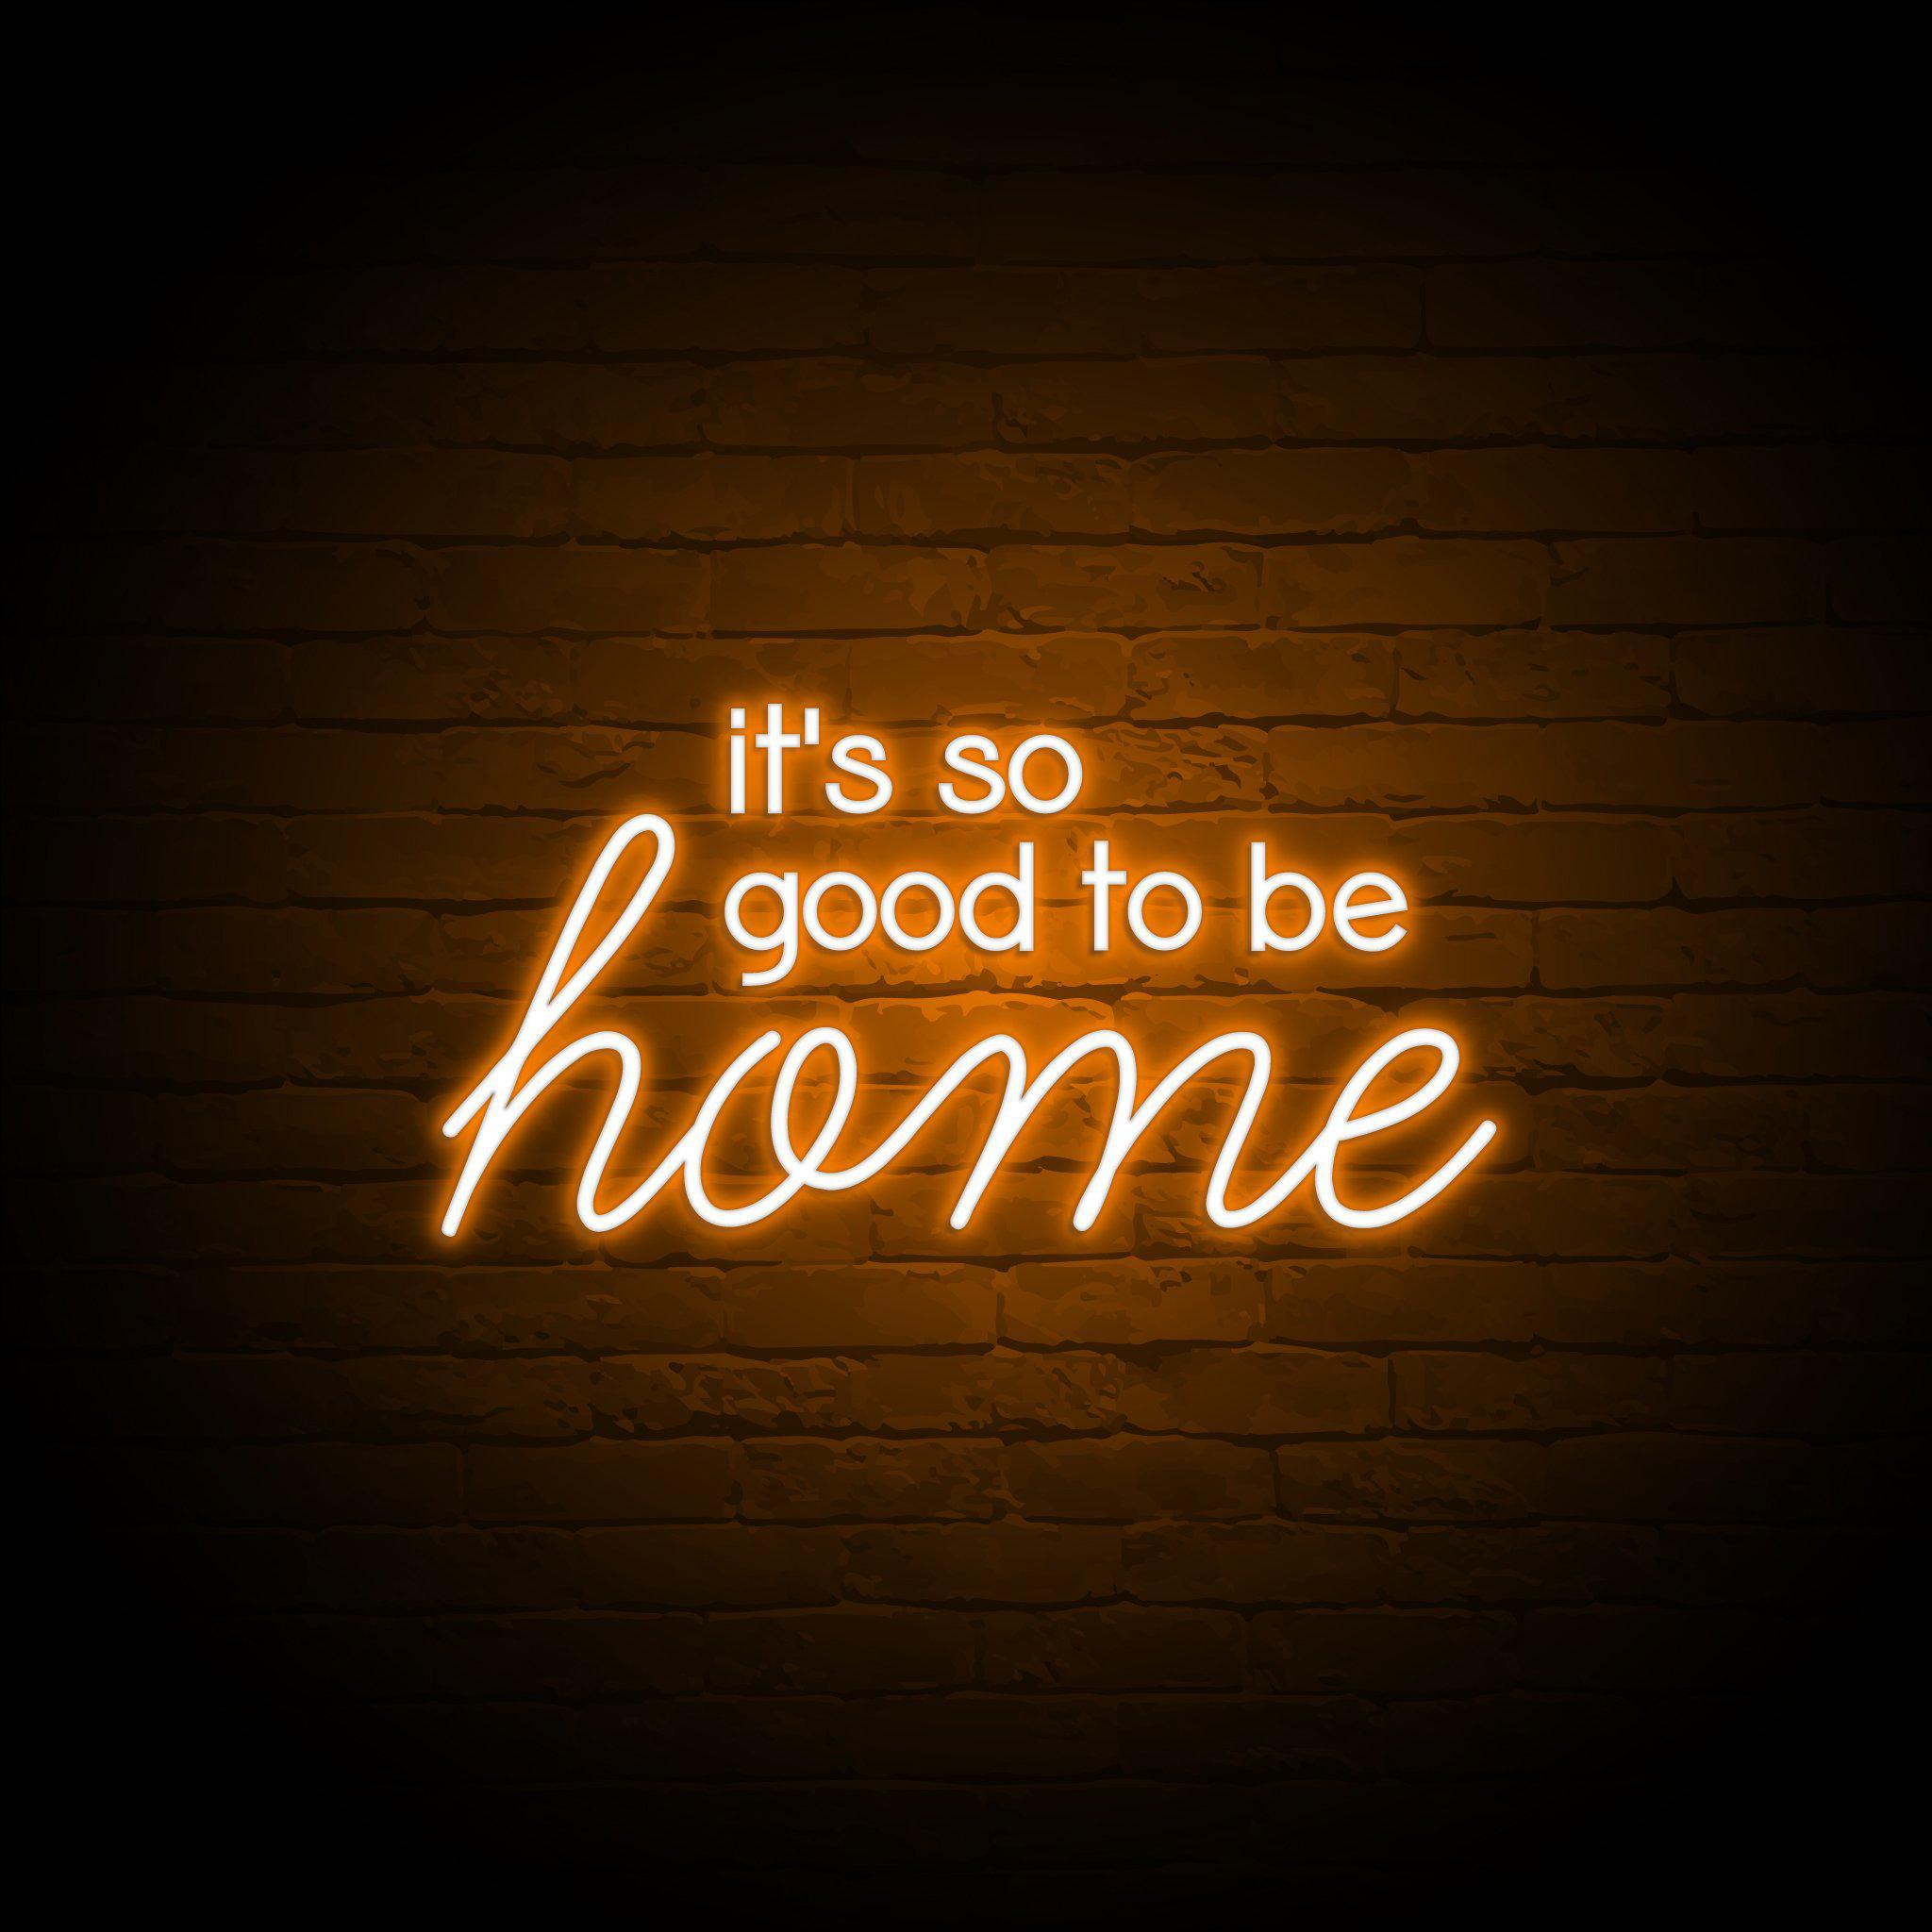 'IT'S SO GOOD TO BE HOME' NEON SIGN